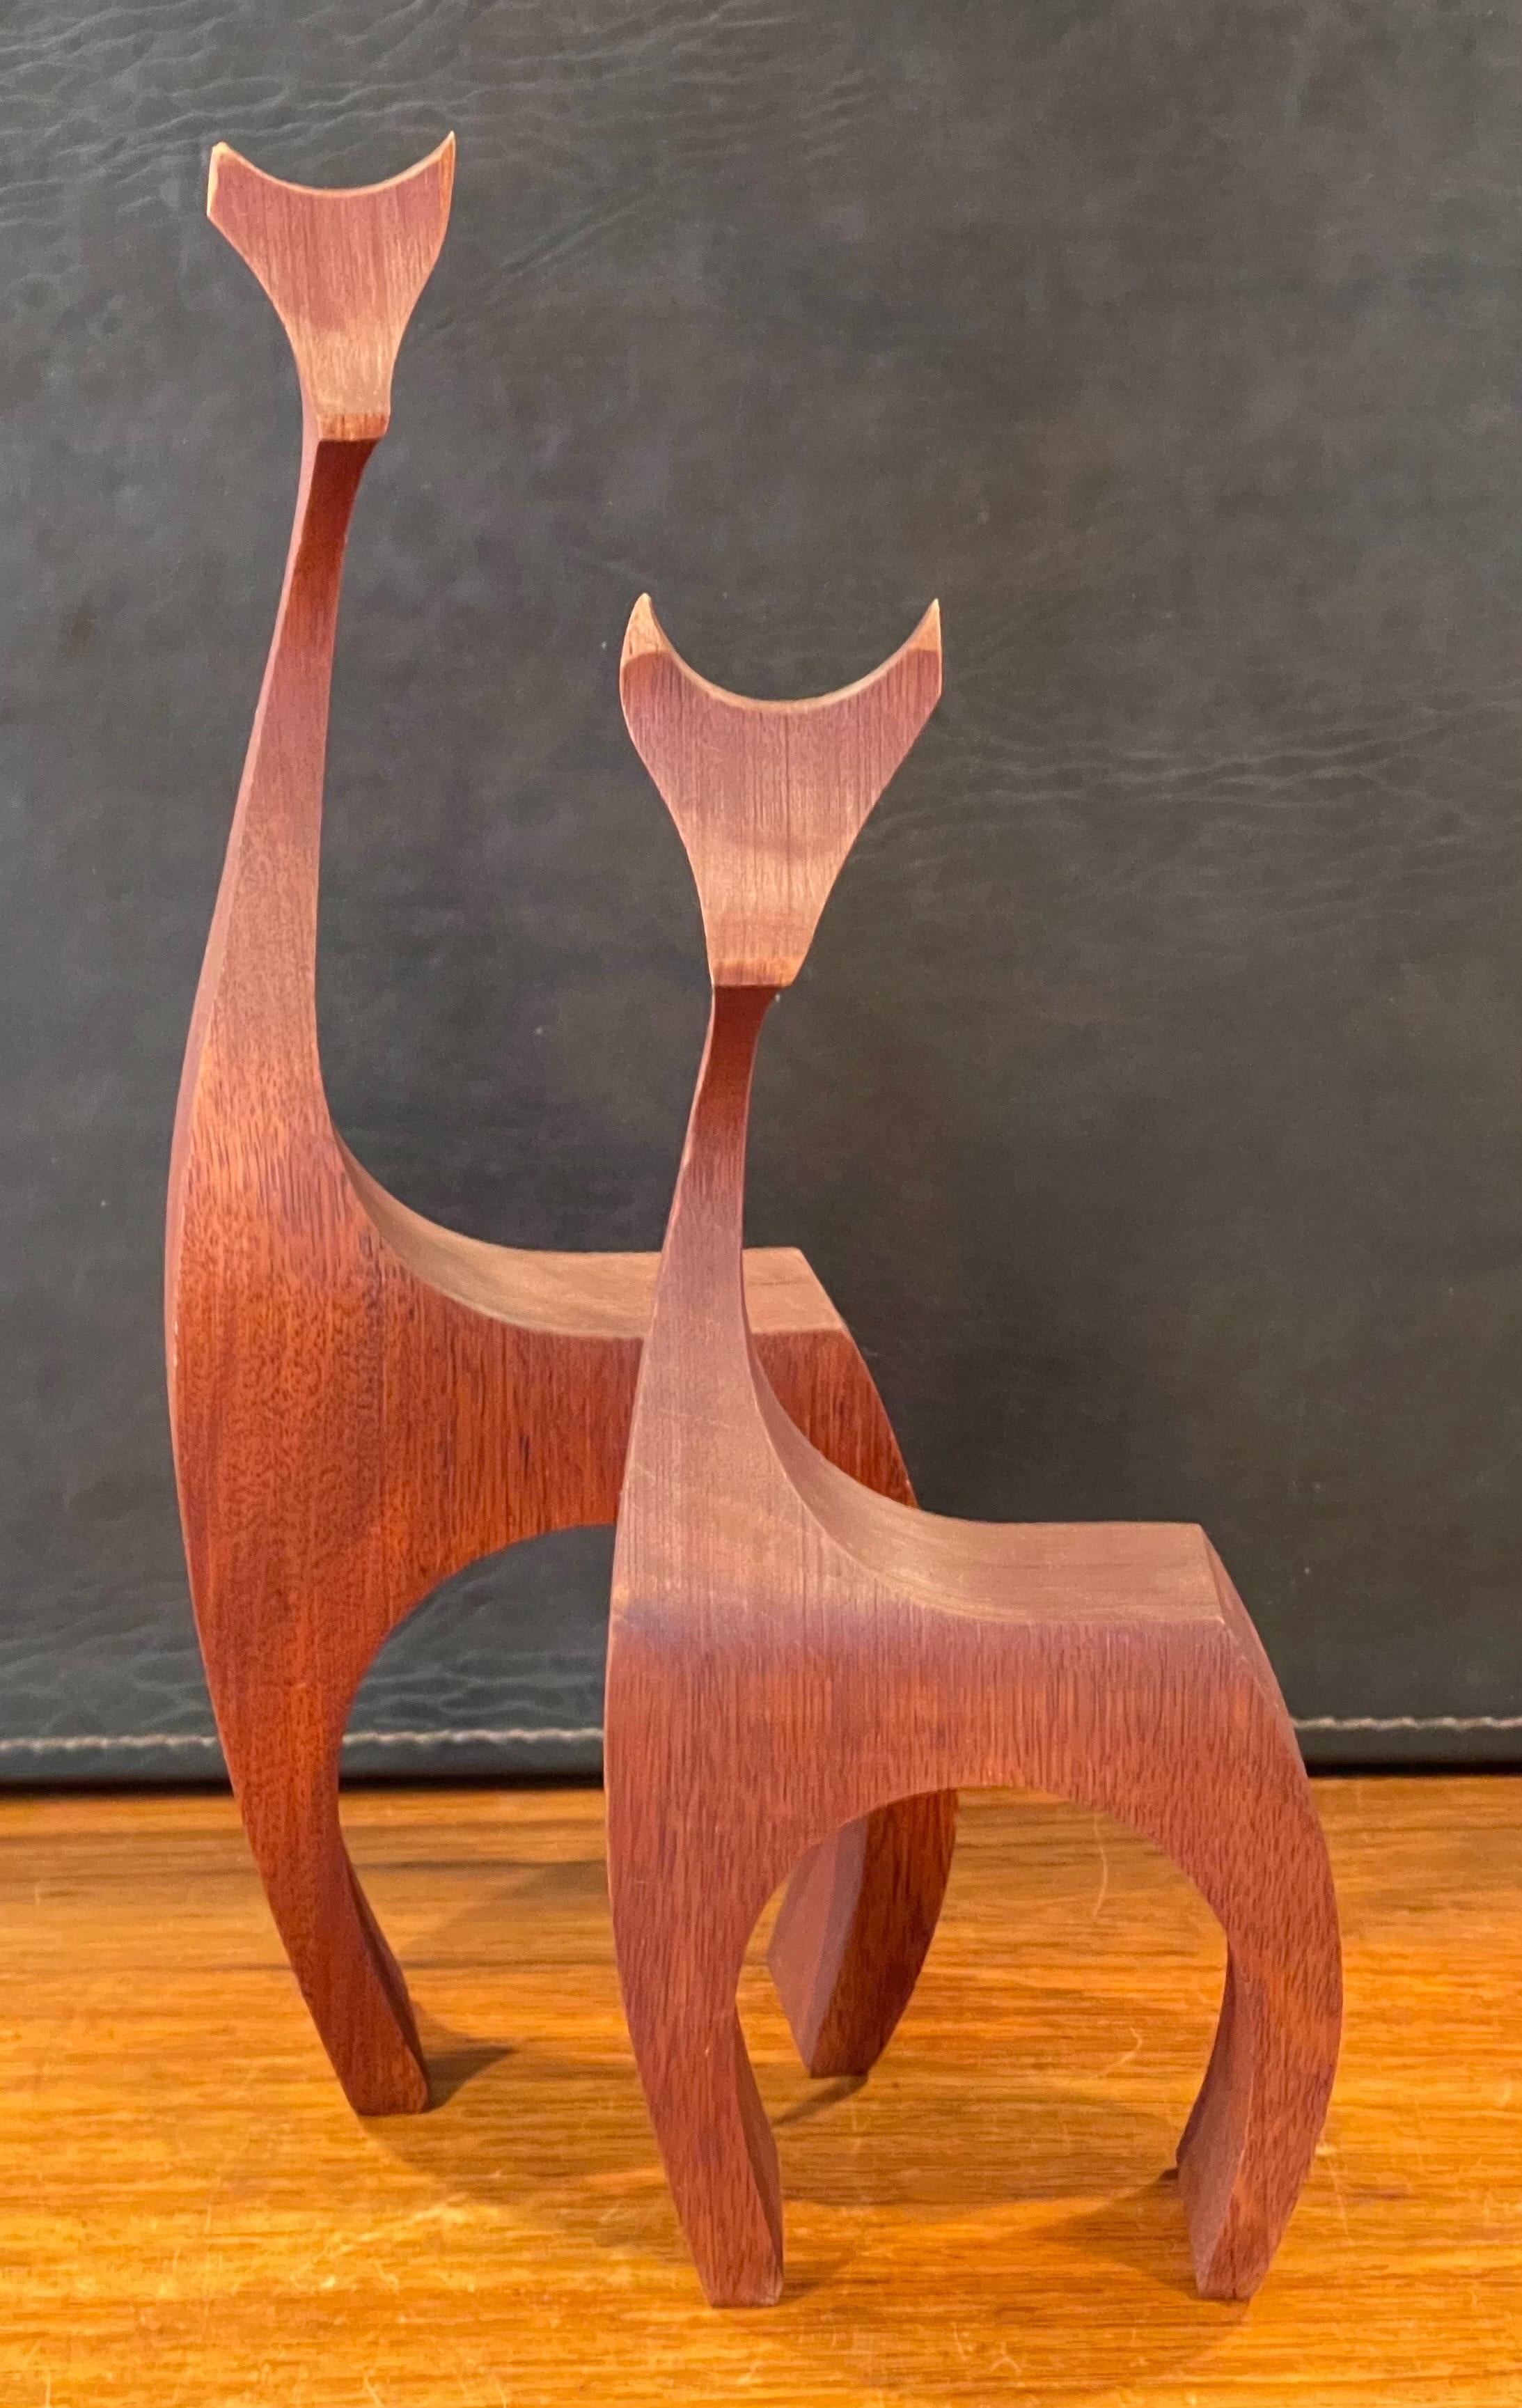 Set of Three Modernist Giraffe Wood Sculptures by Del Zotto Studios In Good Condition For Sale In San Diego, CA